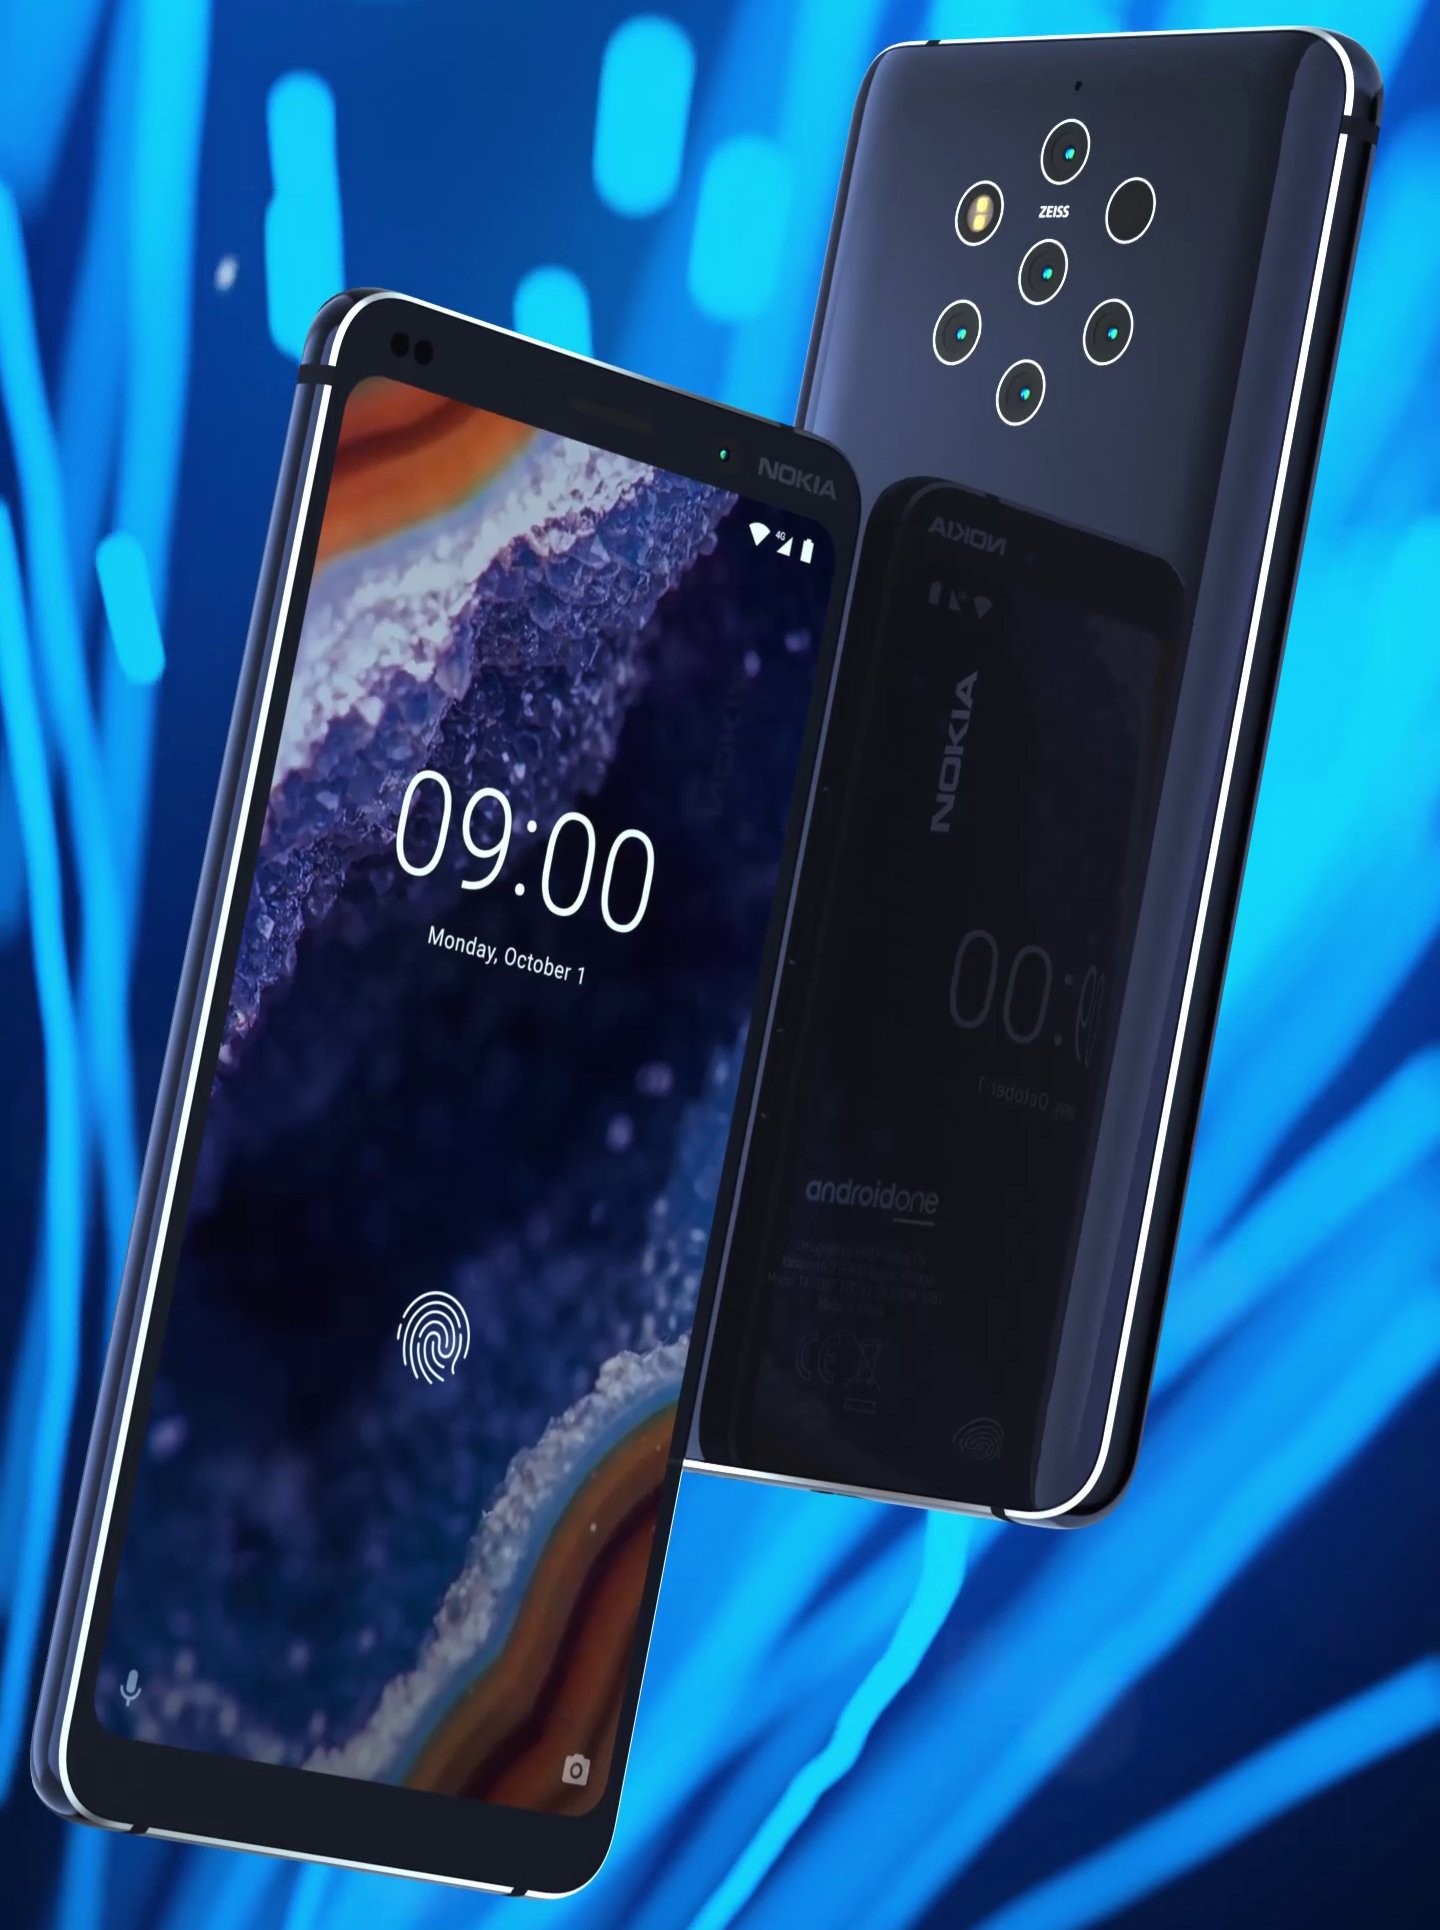 A Nokia 9 PureView render image showing the front and rear of the device.